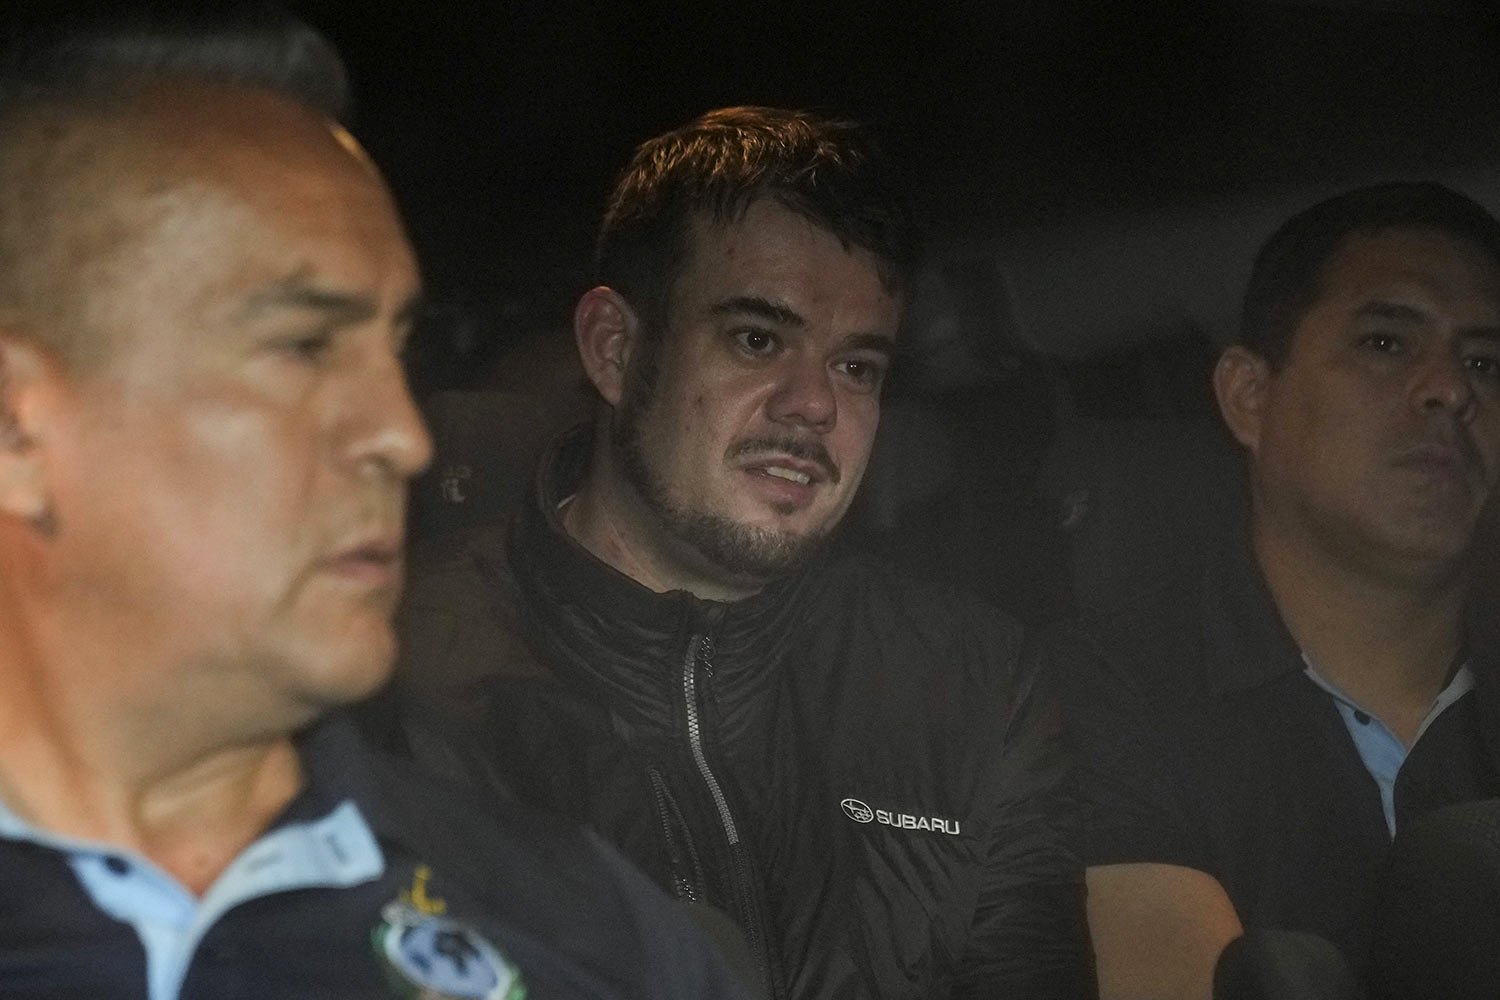  Dutch citizen Joran van der Sloot is driven in a police vehicle from the Ancon I maximum-security prison, outskirts of Lima, Peru, June 8, 2023. The main suspect in the unsolved 2005 disappearance of American student Natalee Holloway on the Caribbea